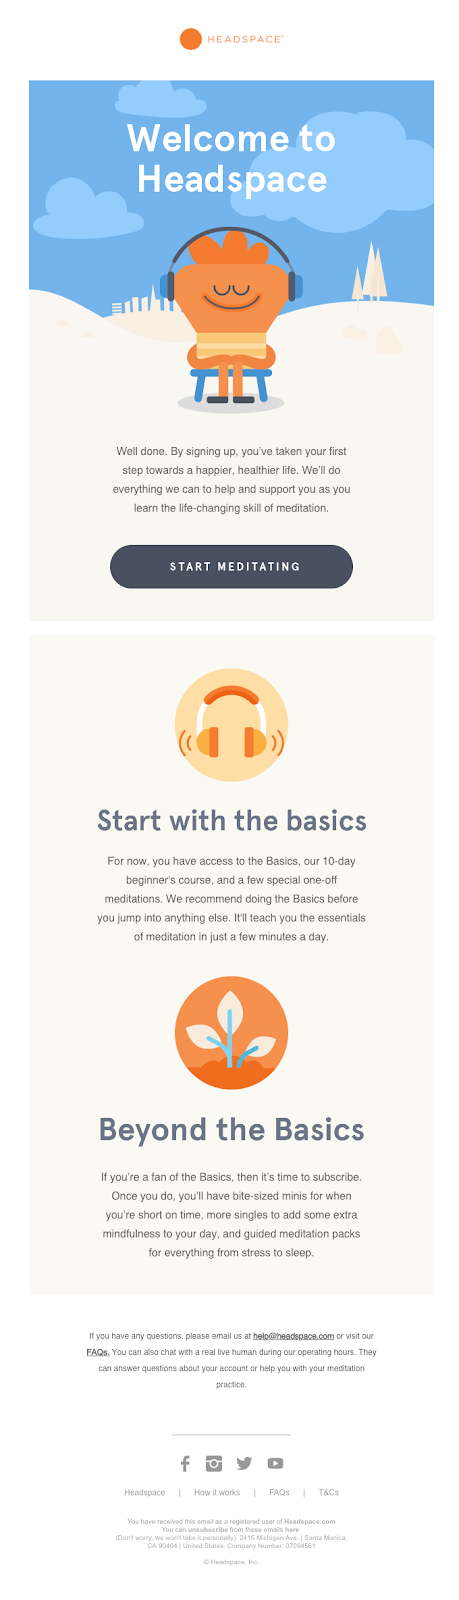 Example of Headspace welcome email.